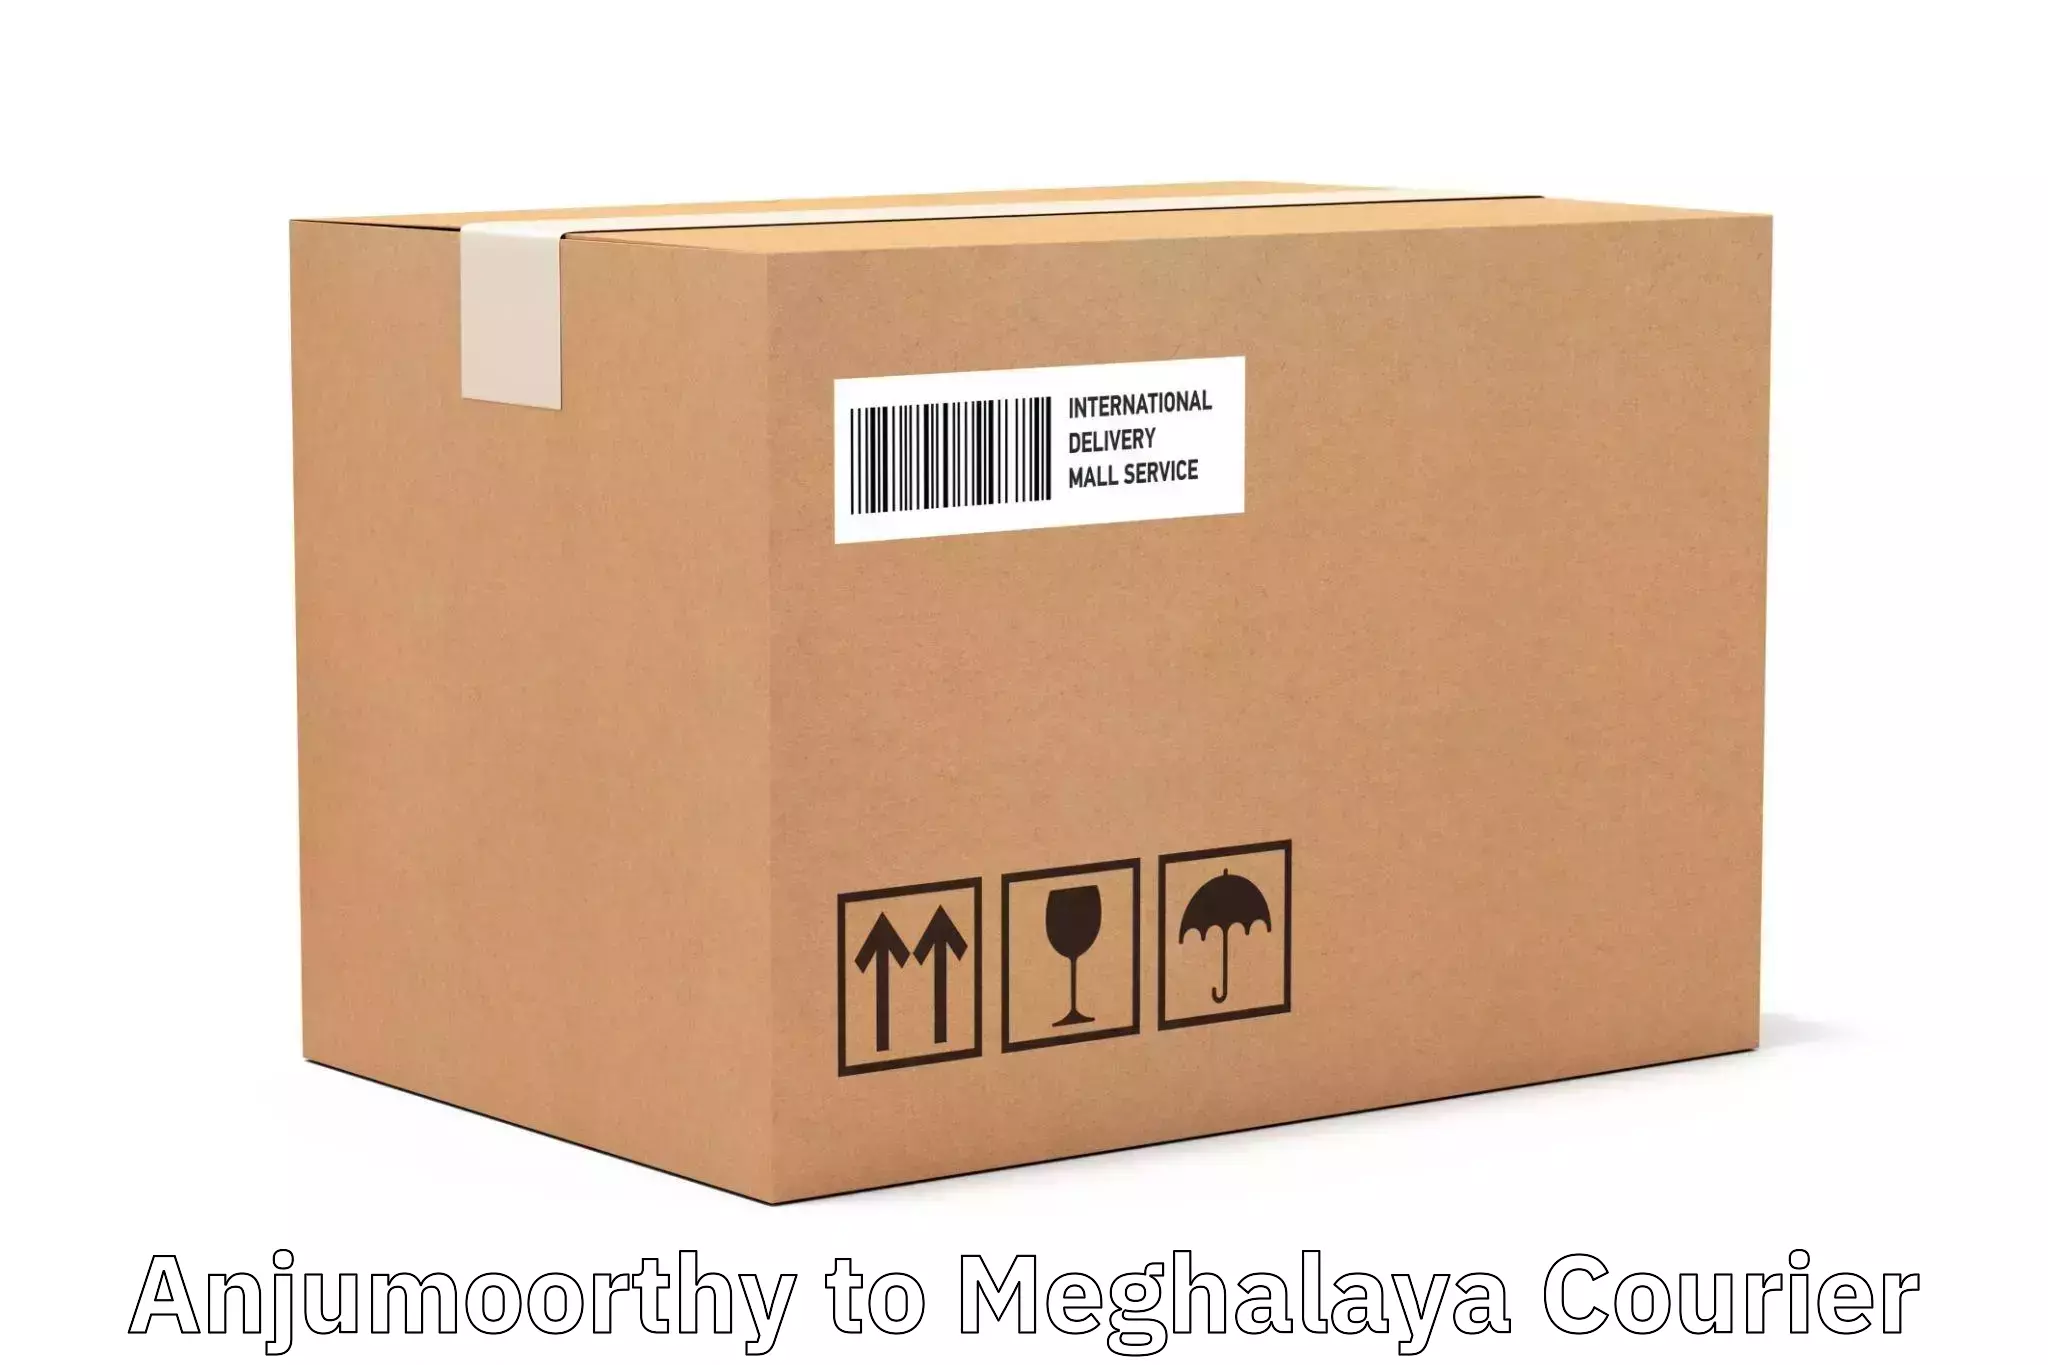 Next-generation courier services Anjumoorthy to Meghalaya